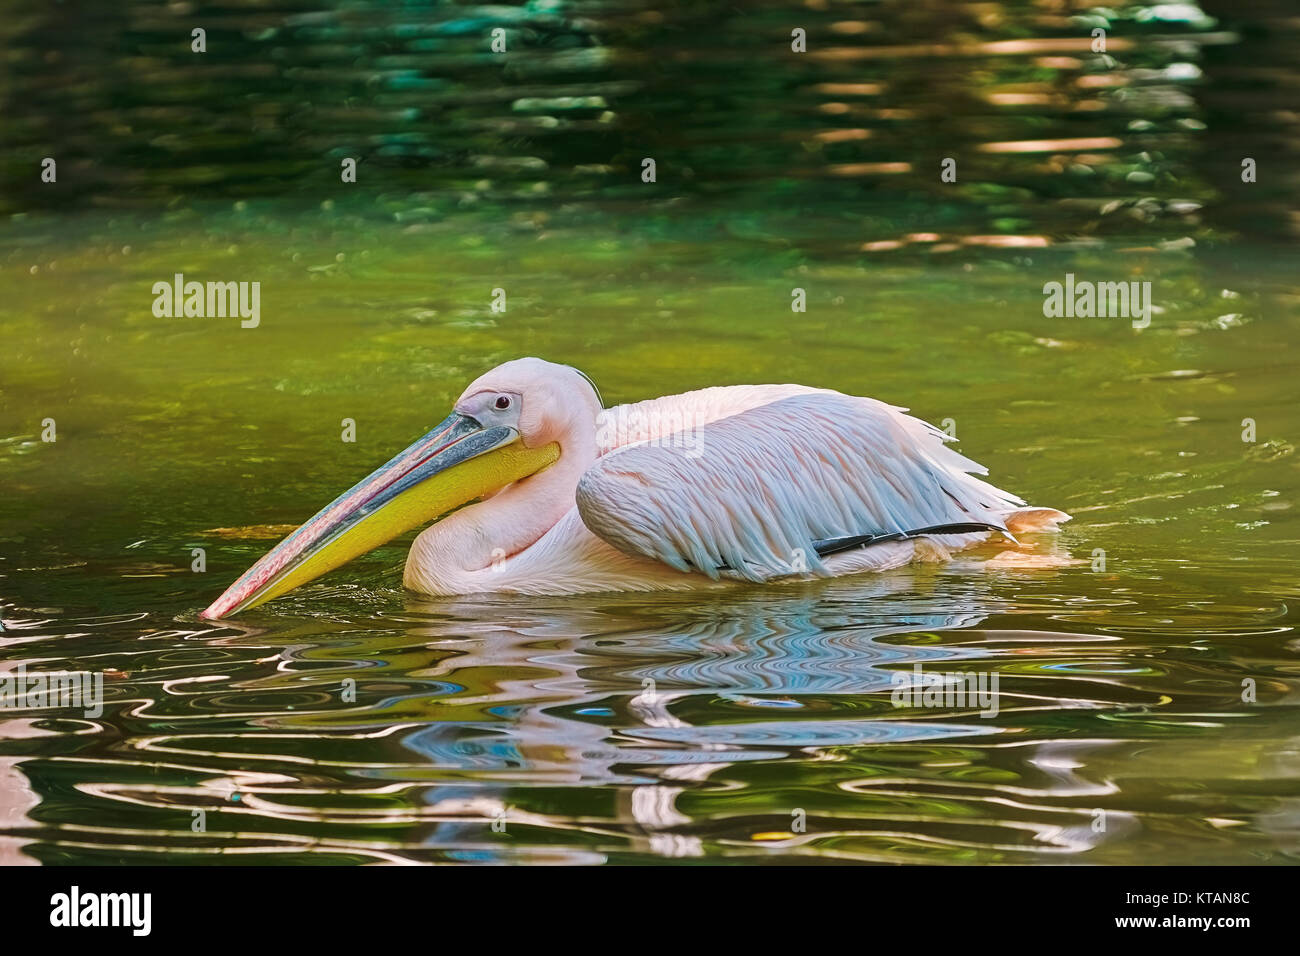 Pelican on the Pond Stock Photo